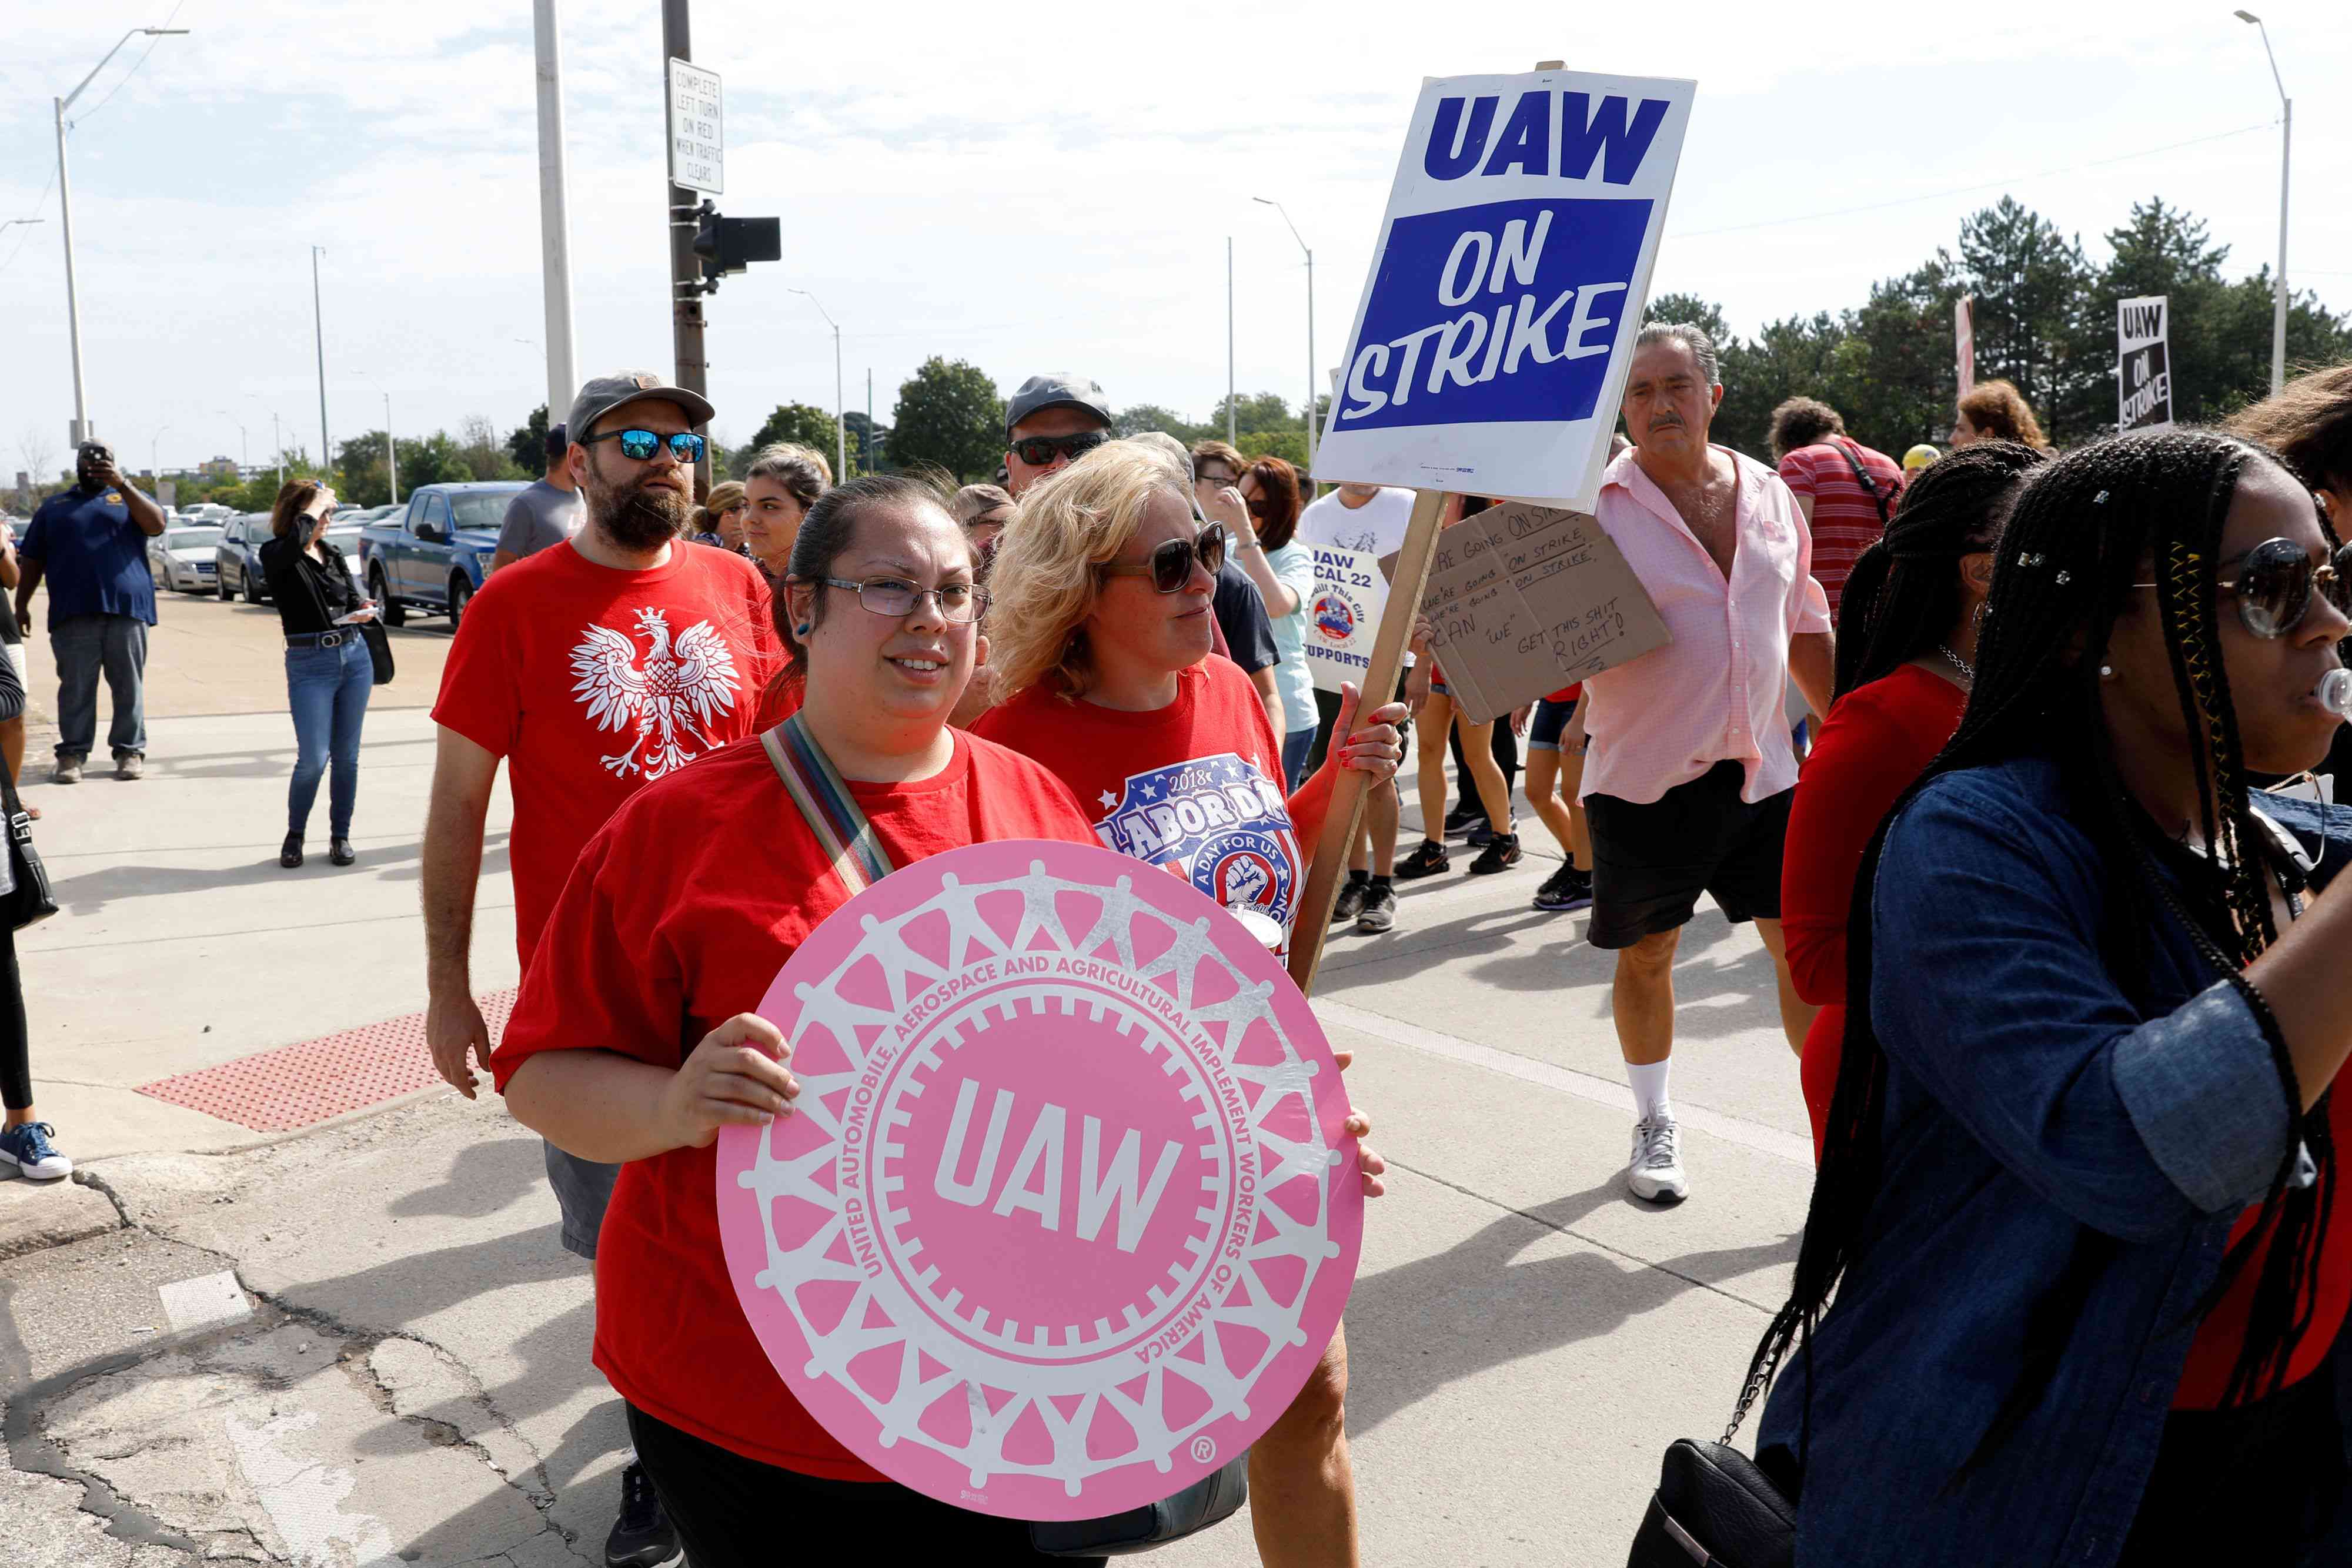 Black and white UAW picketers marching on strike